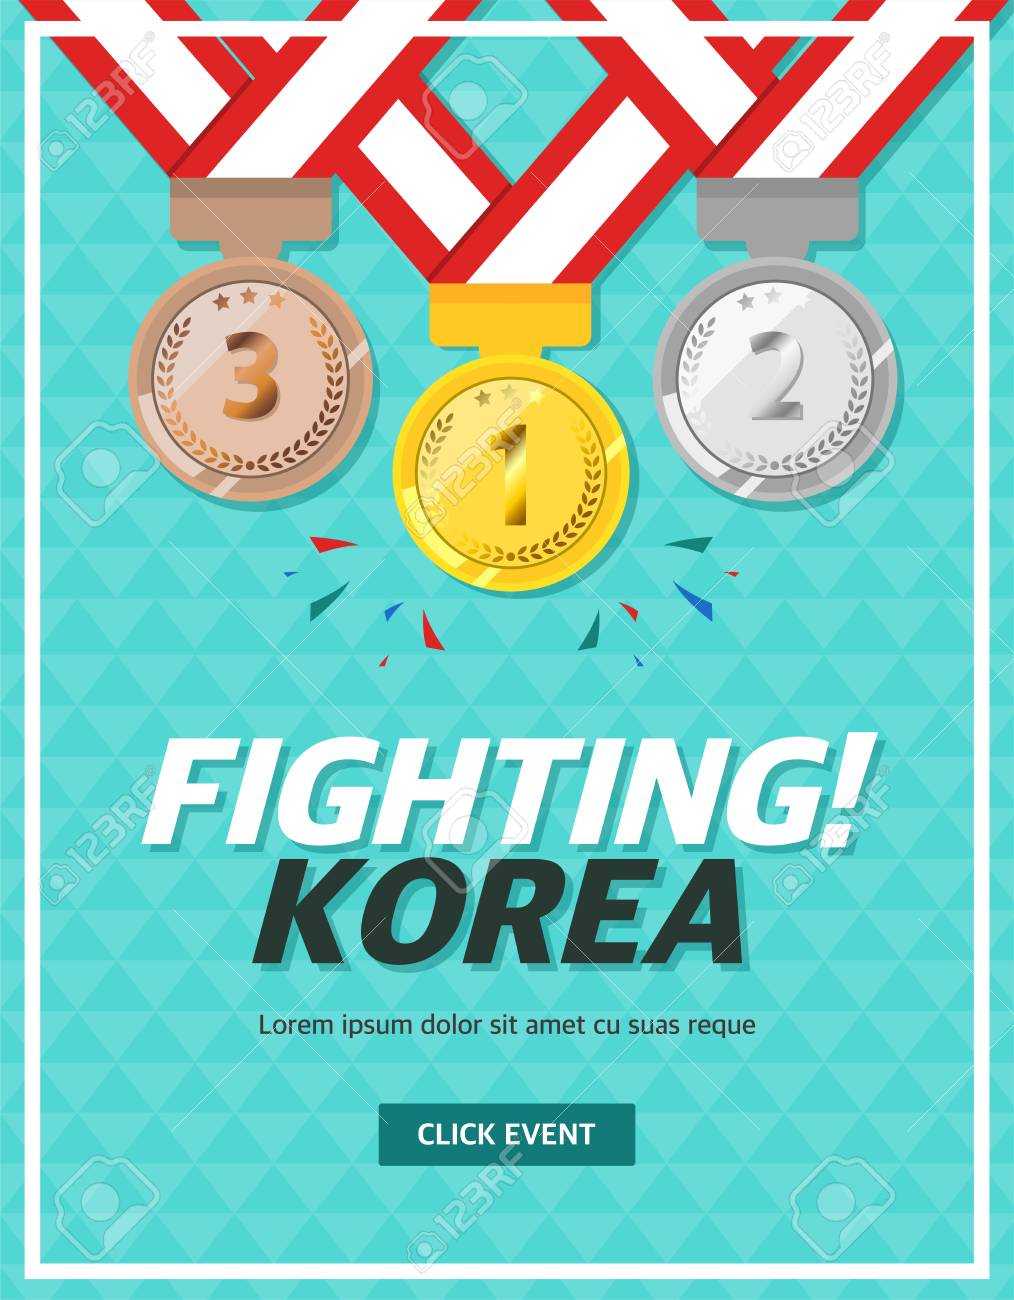 Event Banner Template With Medals – Fighting Korea With Event Banner Template